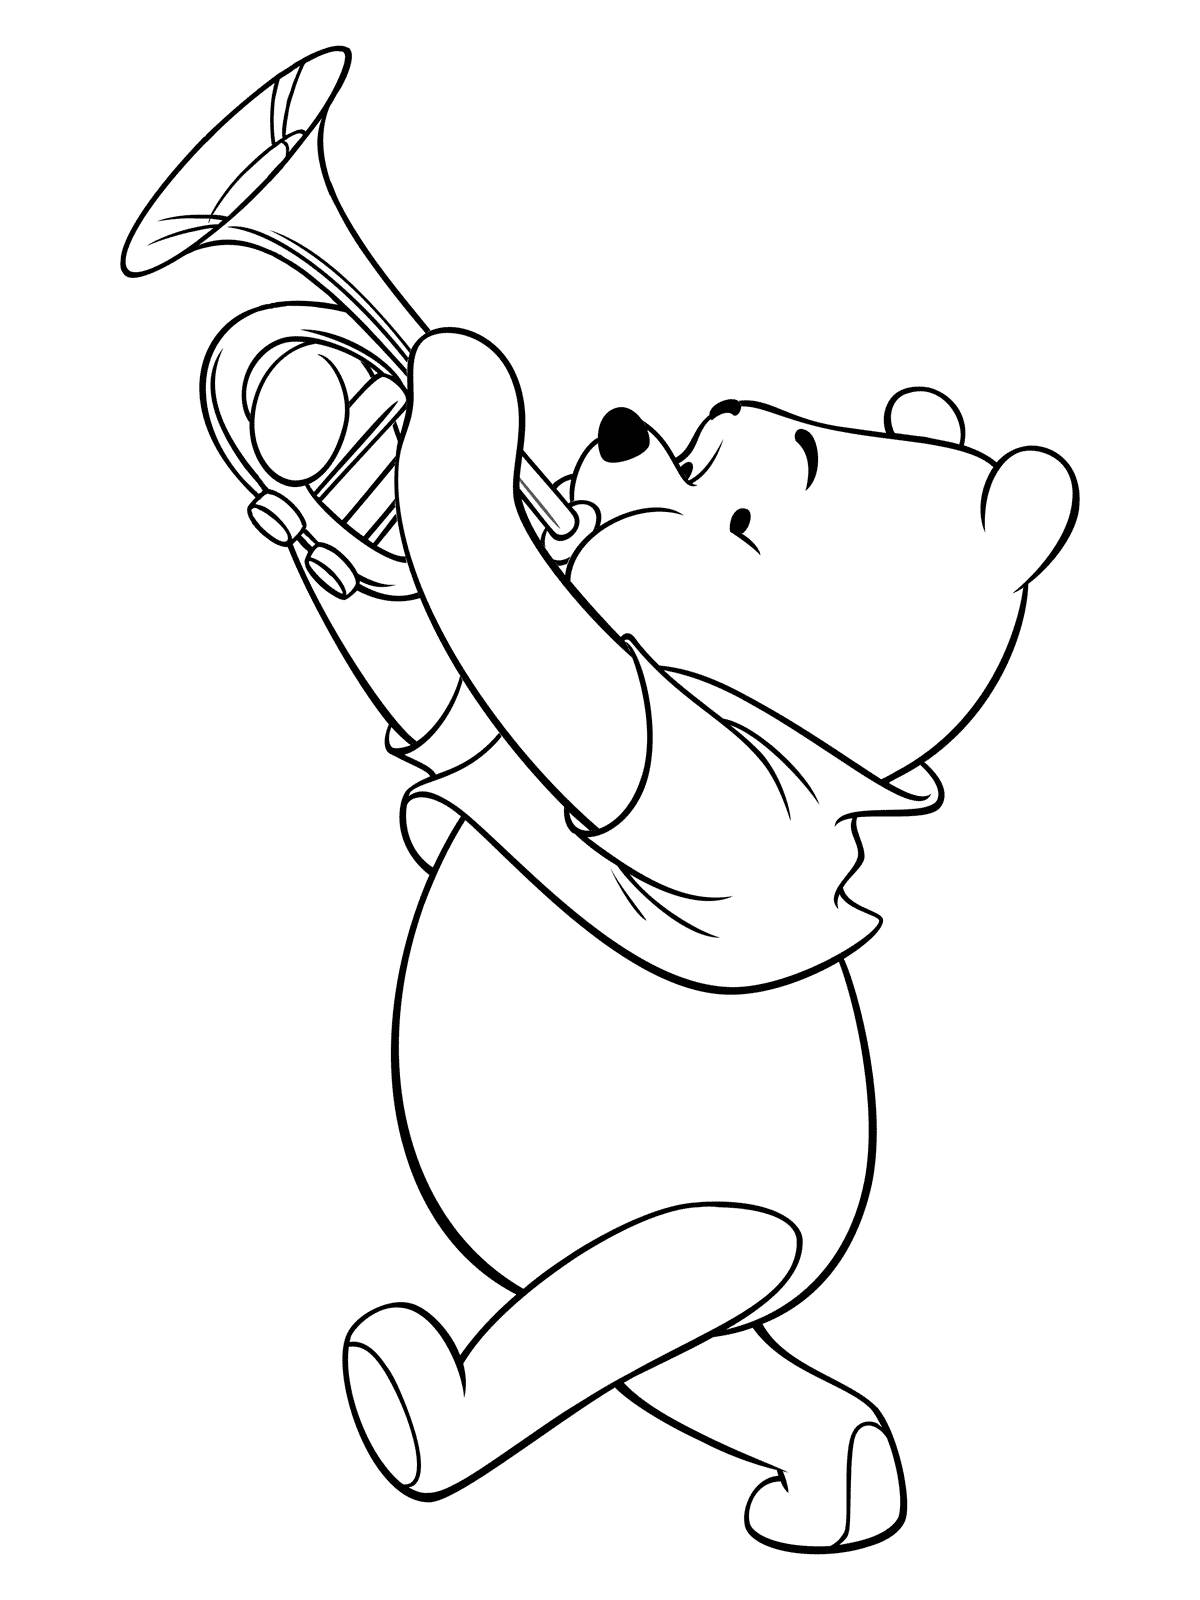 Winnie the Pooh with a pipe